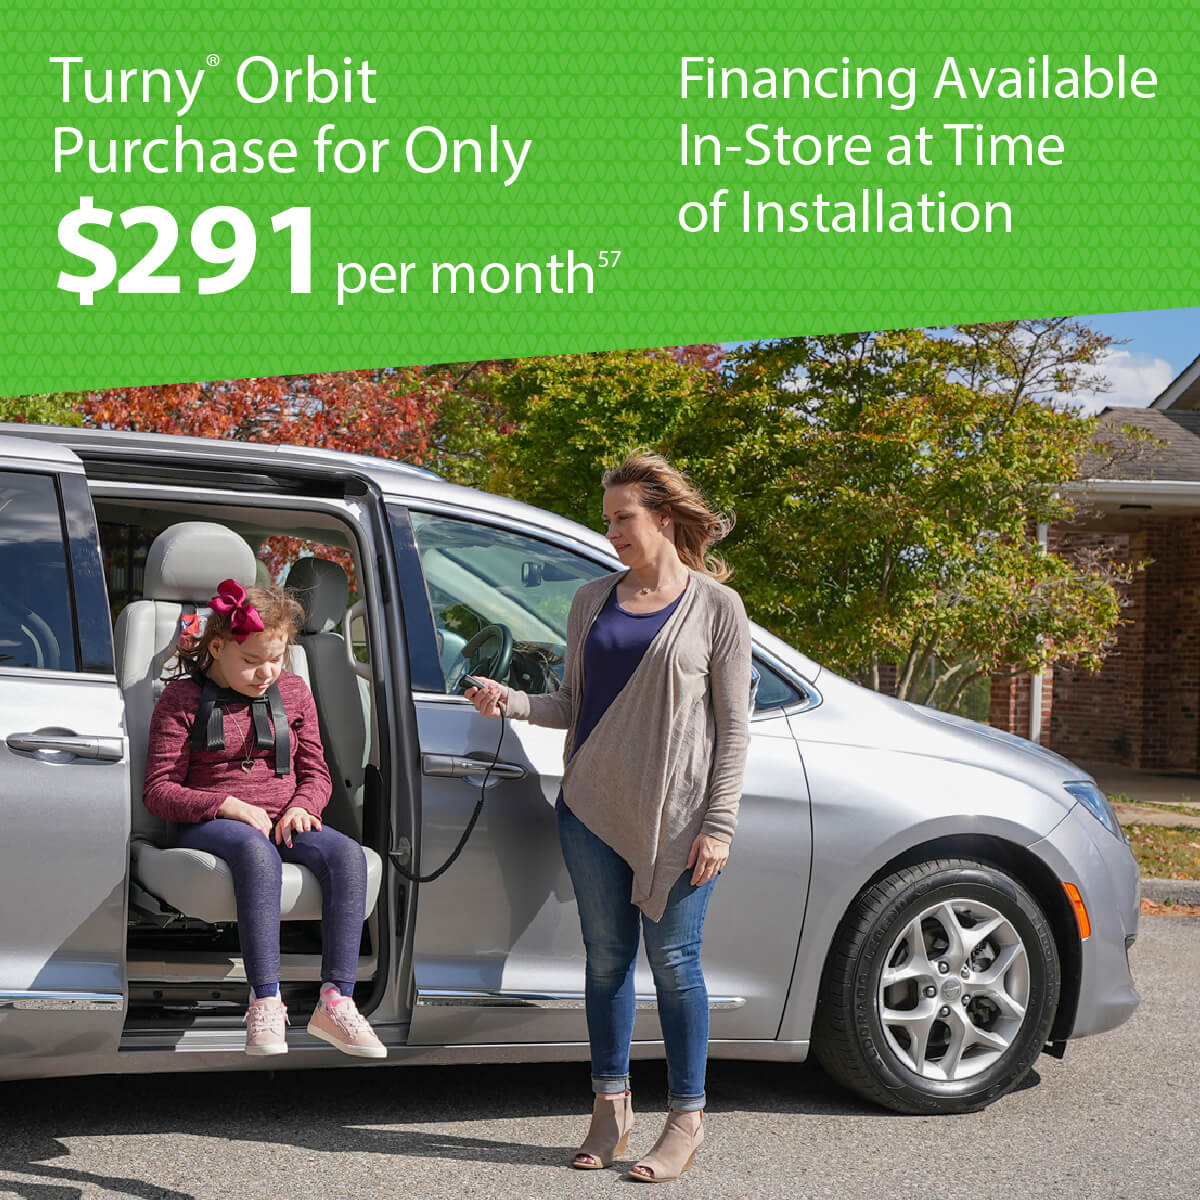 Turny Orbit with Financing Available